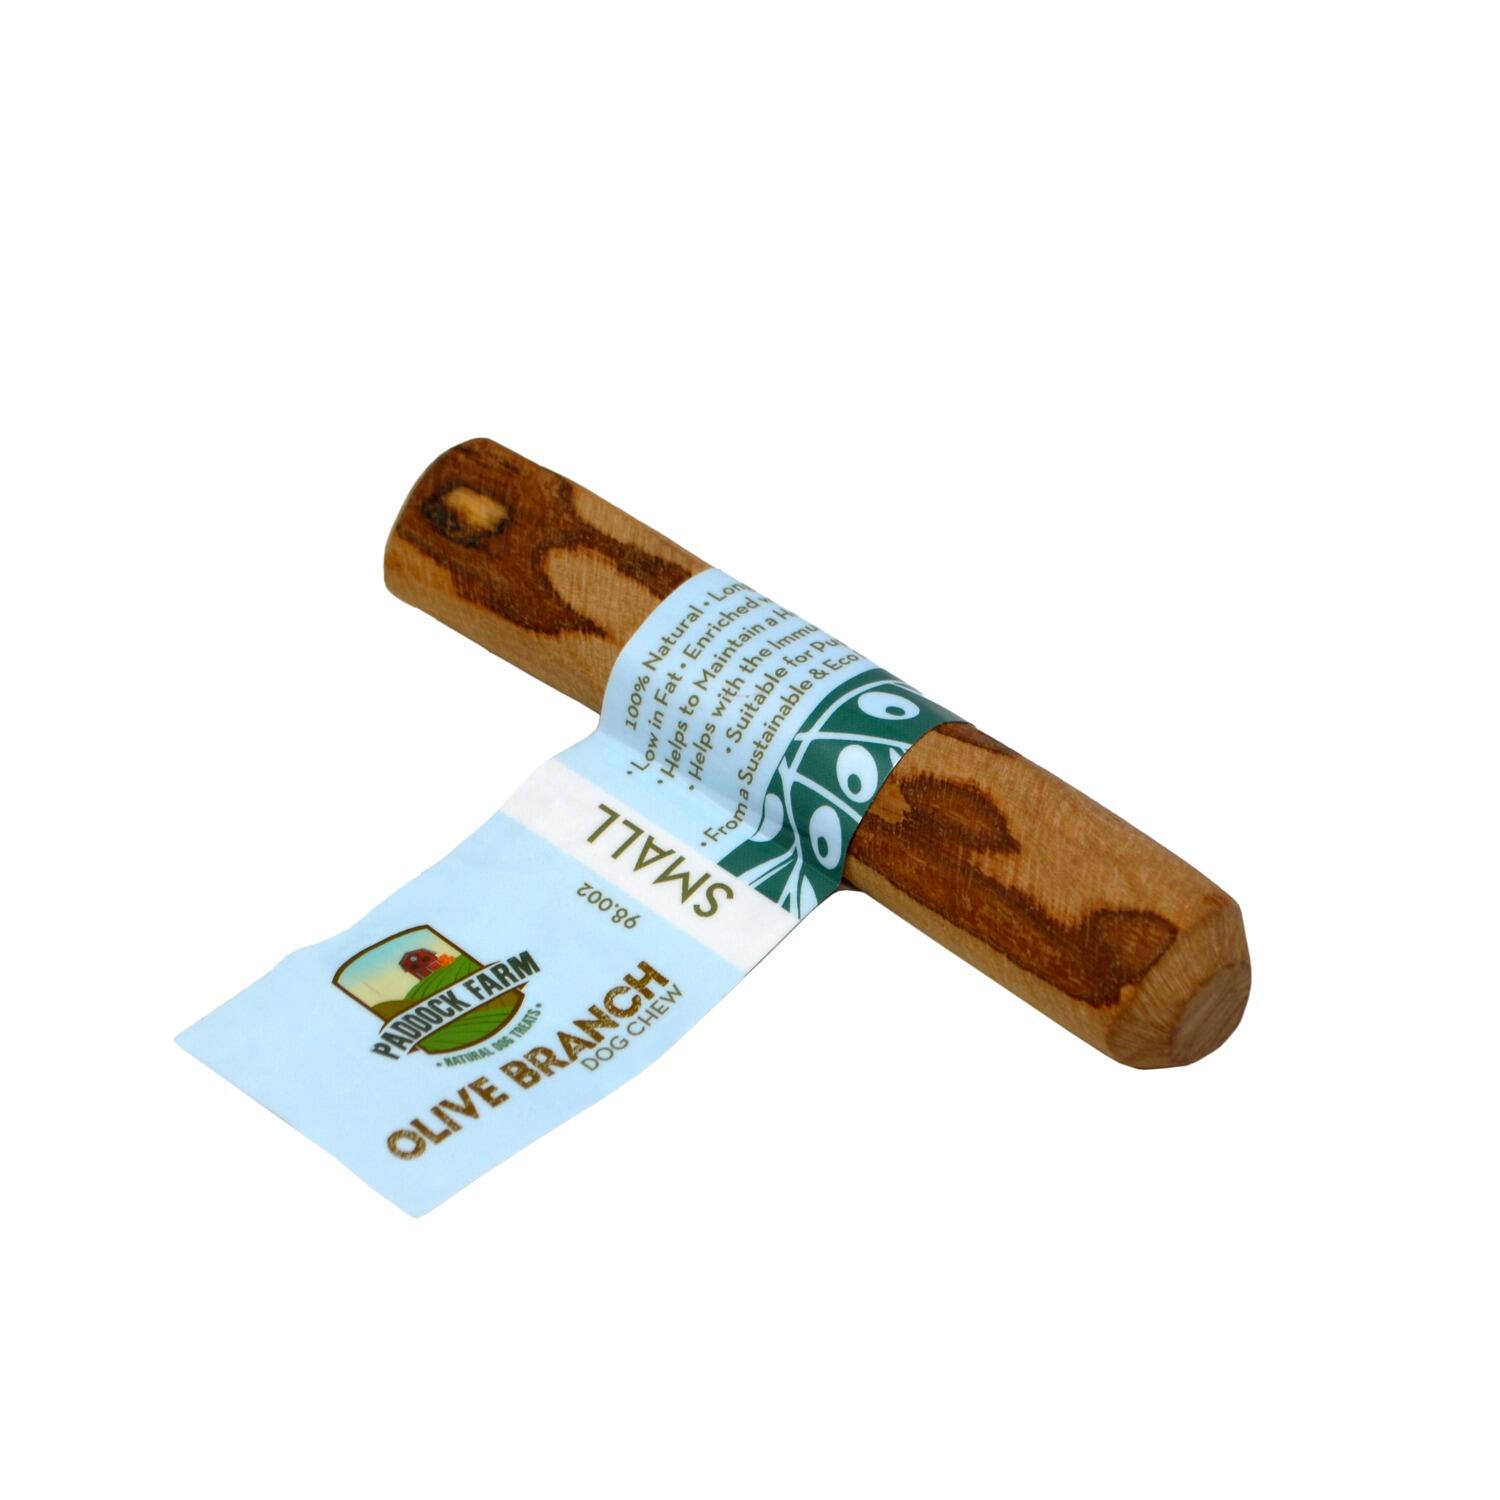 A Natural Olive Branch Dog Chew from Paddock Farm